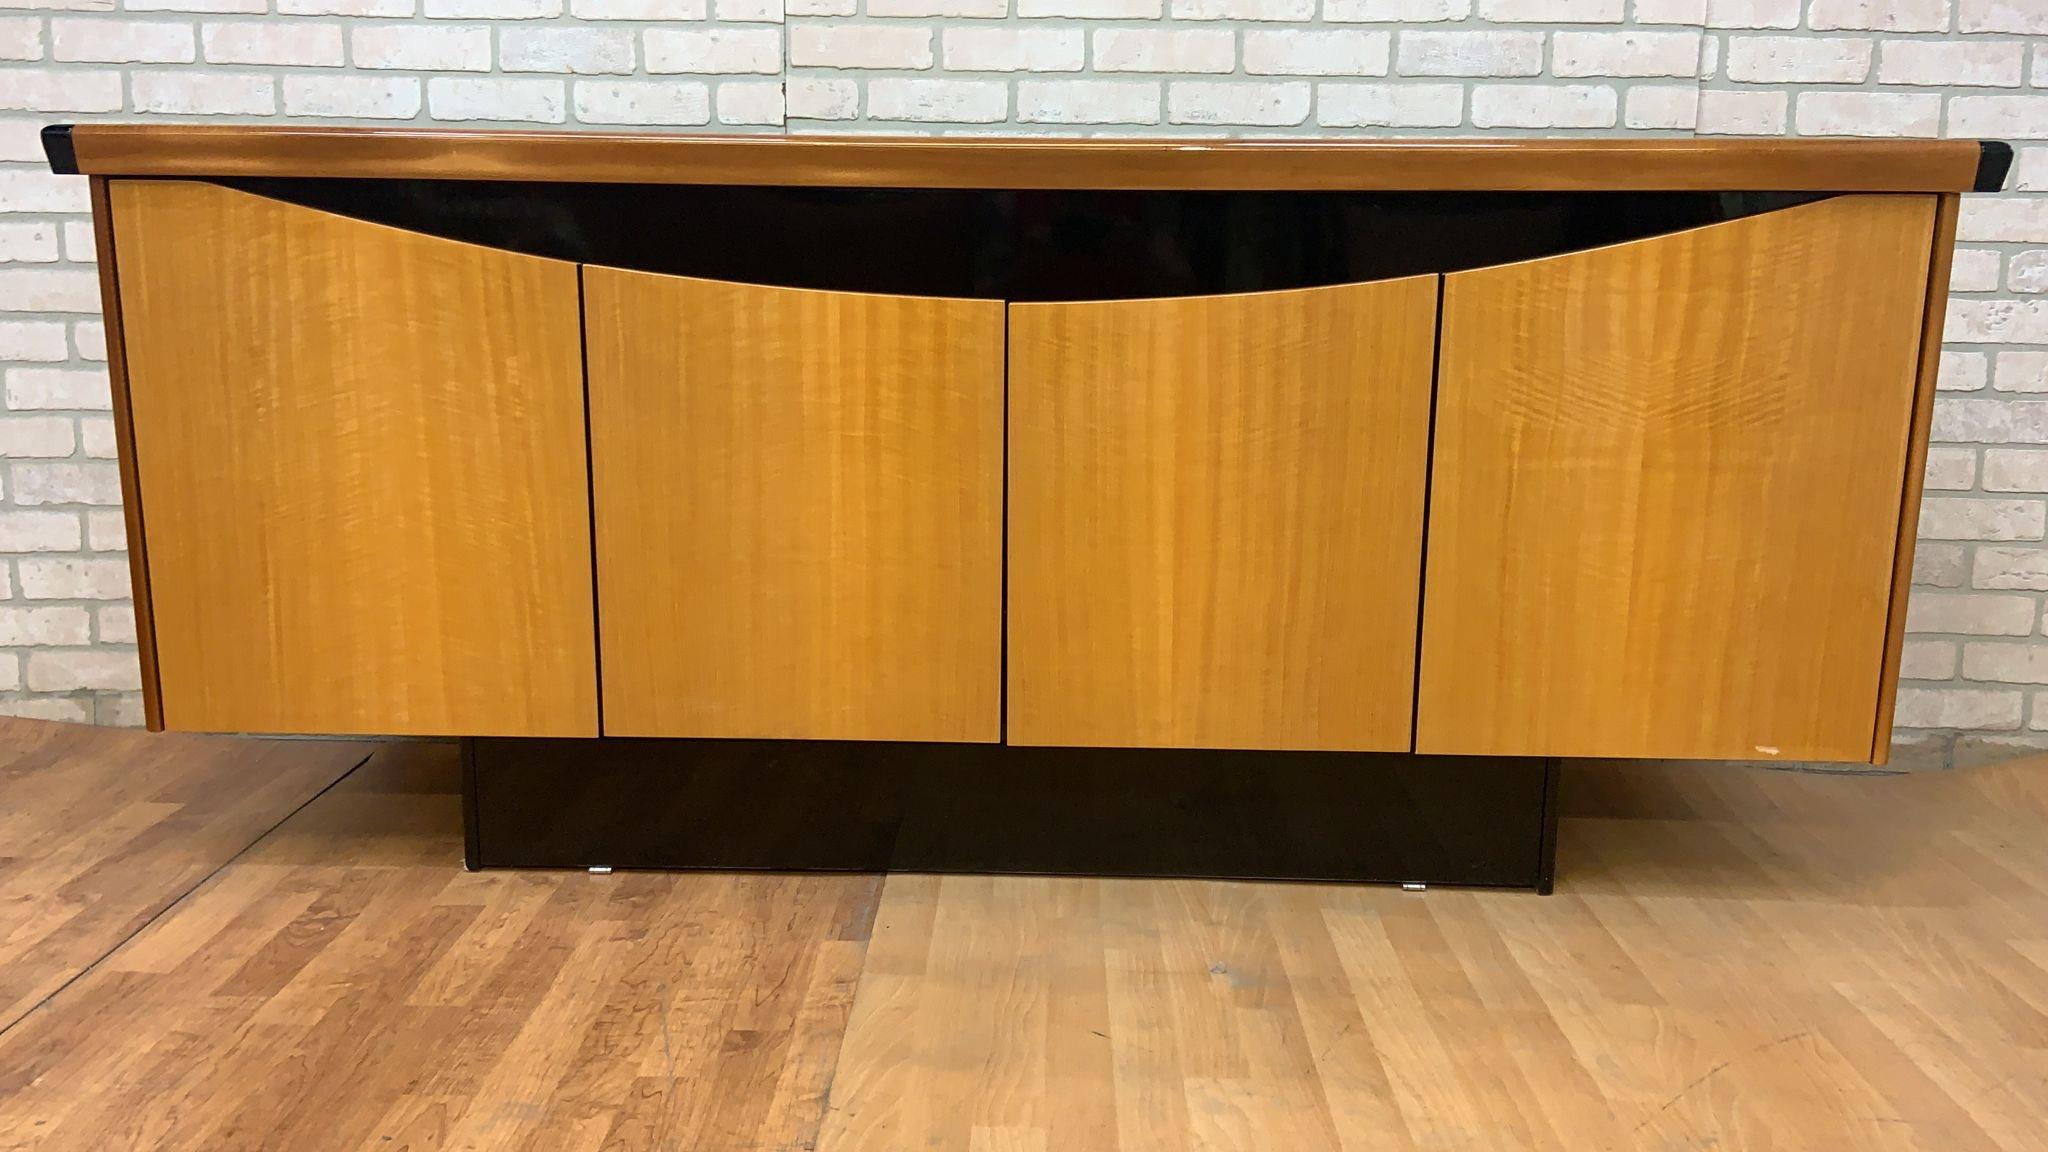 Vintage Italian Art Deco Birdseye Maple and Satinwood Black Lacquered Sideboard/Credenza

Gorgeous vintage Italian art deco sleek & chic maple/satinwood console with black piano lacquered trim. The cabinet has 4 doors, 2 shelves and a bottom center